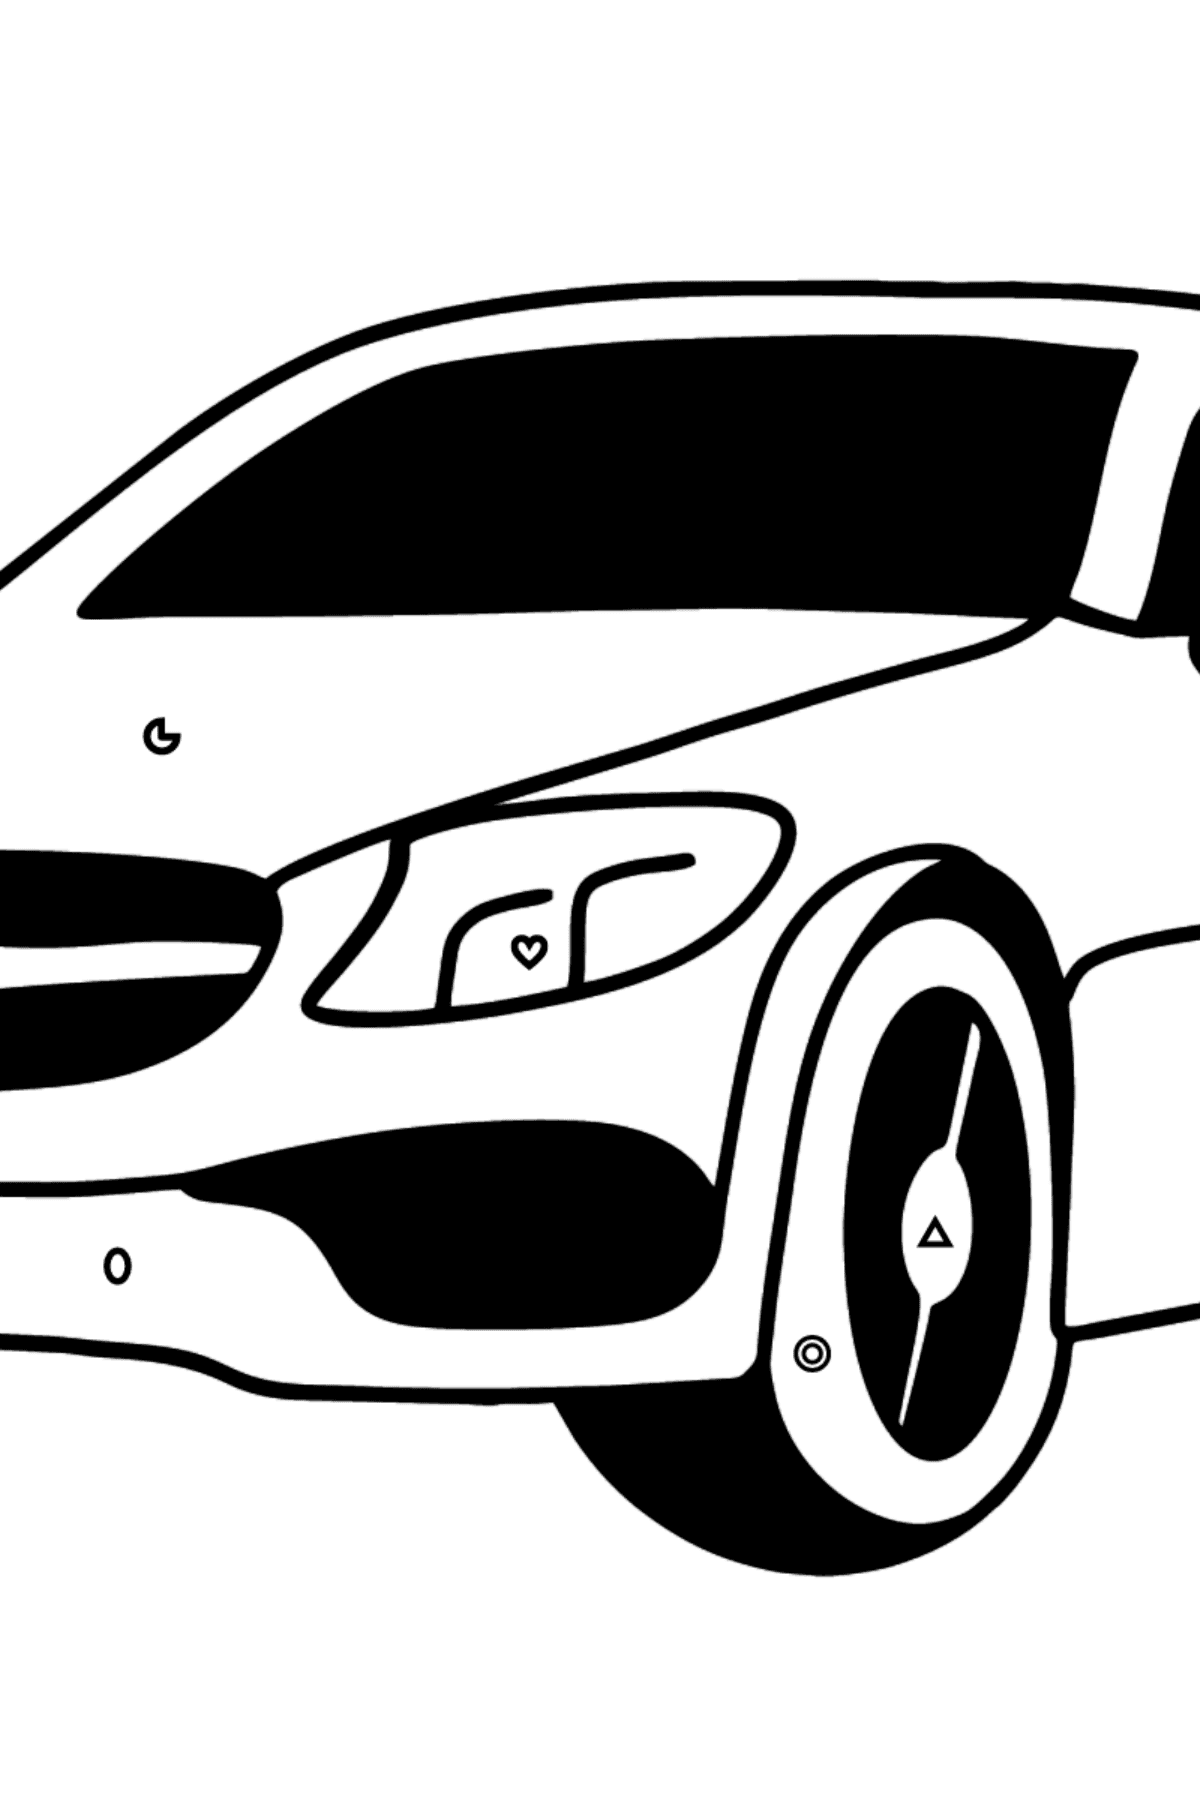 Mercedes C63 AMG car coloring page - Coloring by Geometric Shapes for Kids